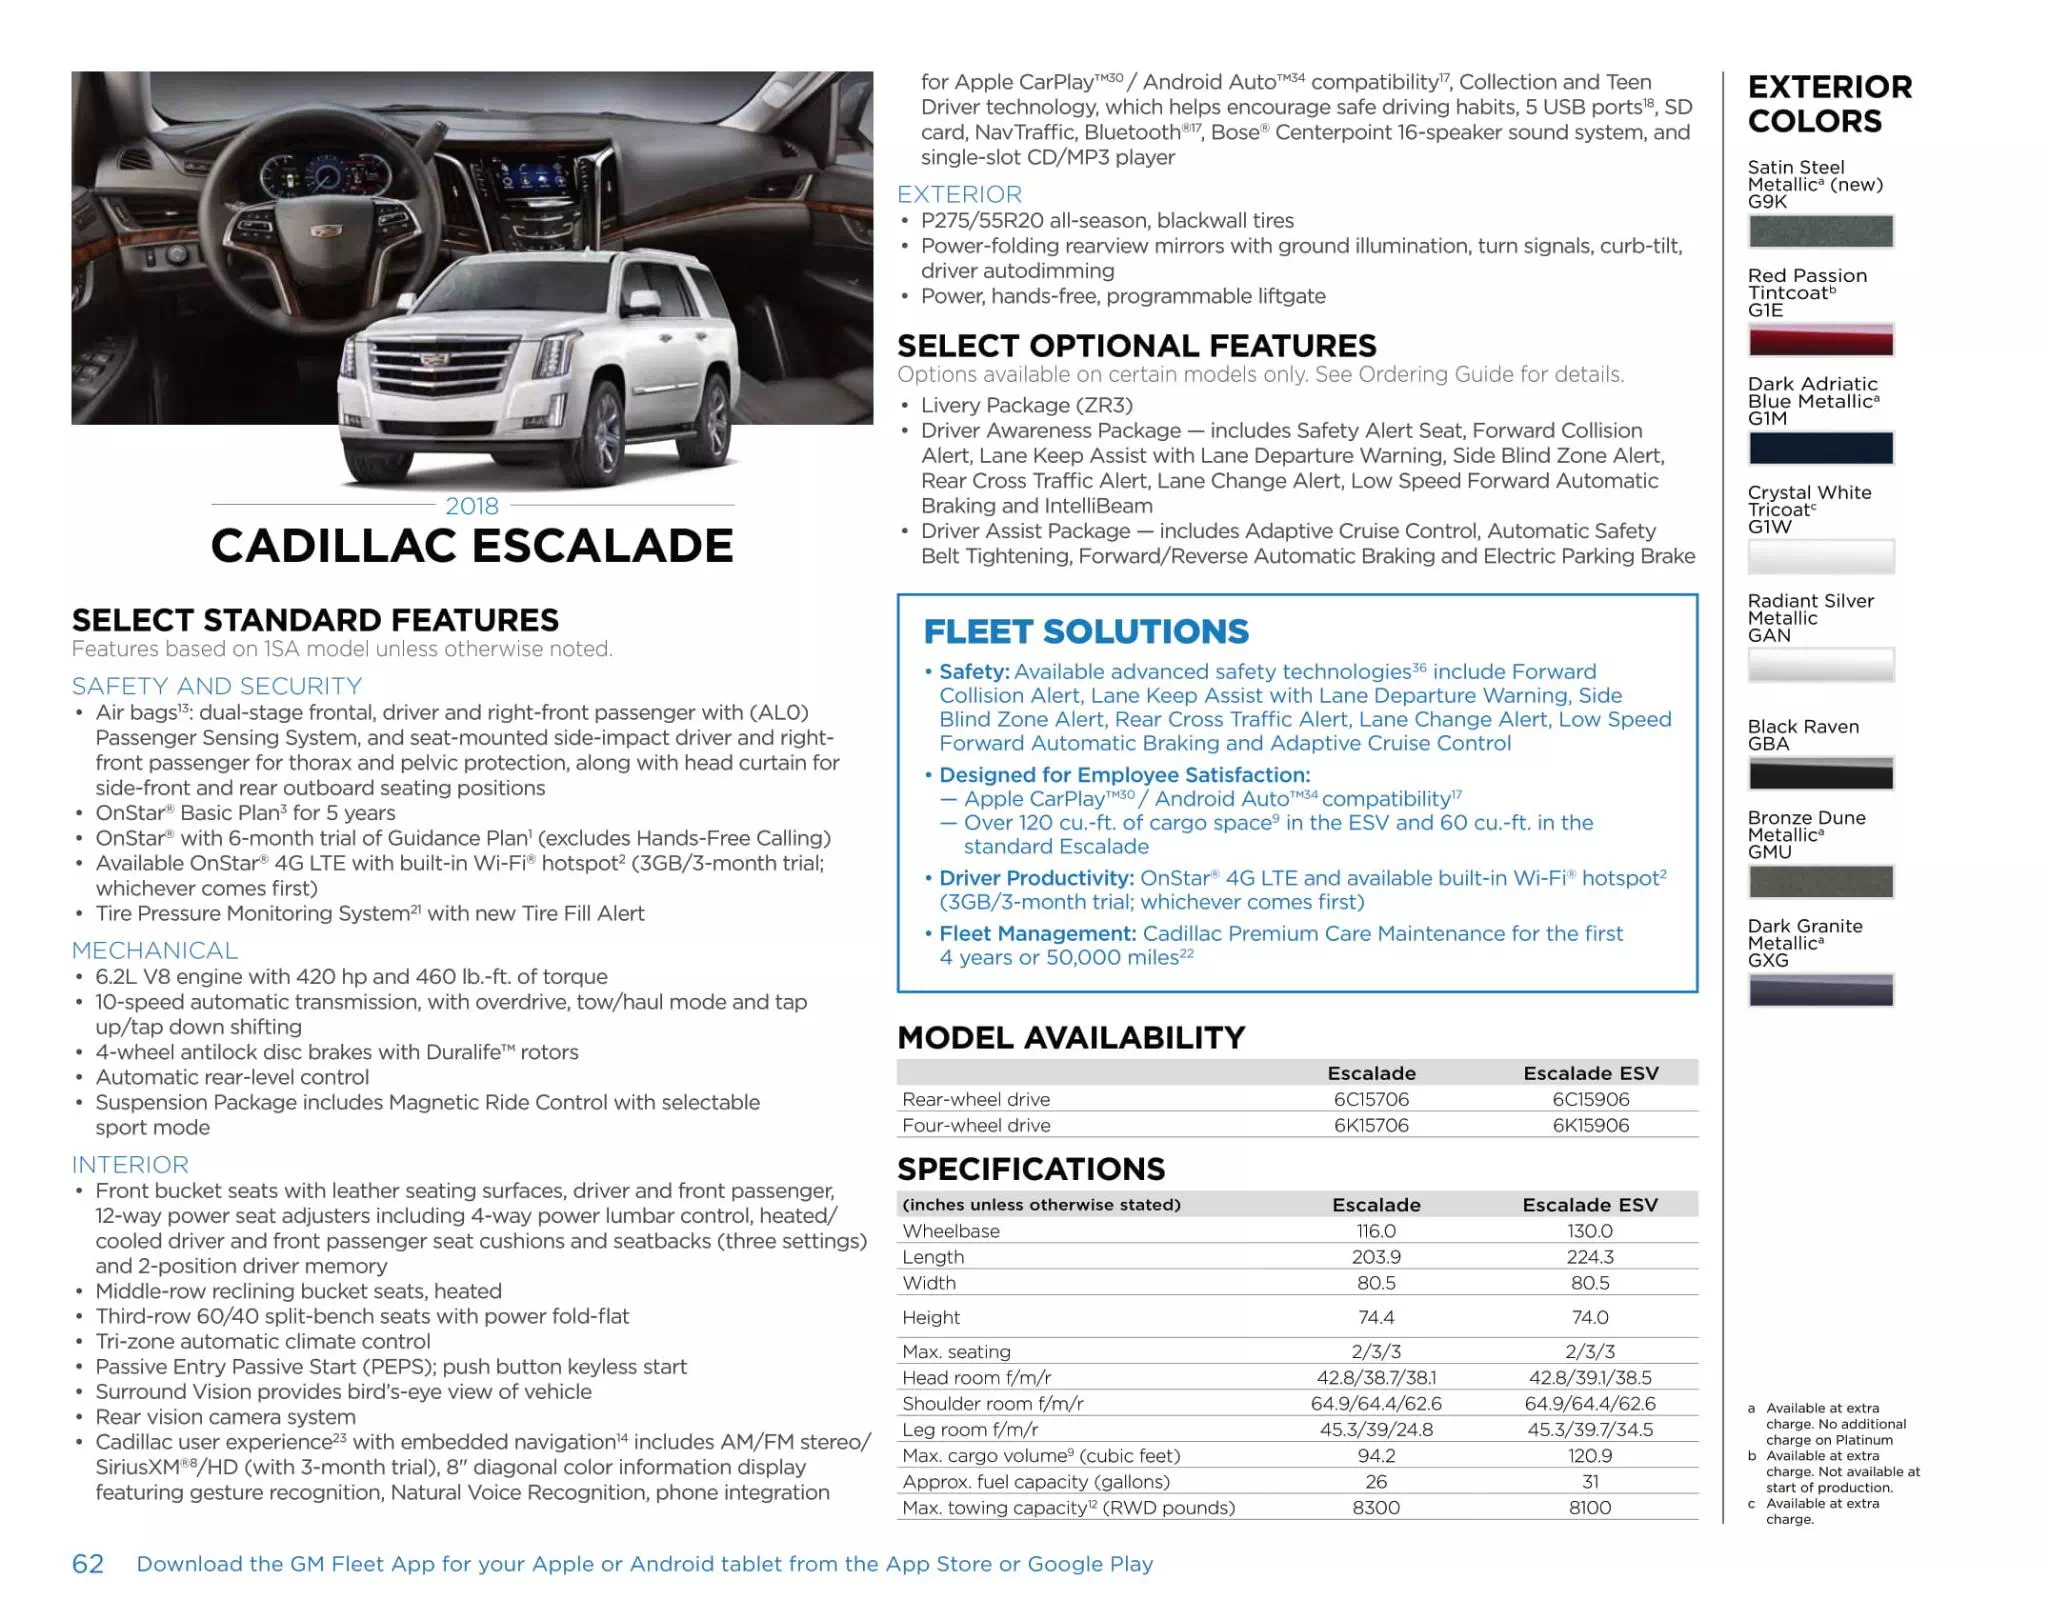 2018 GM Sell Sheet For escalade Color Codes and Models